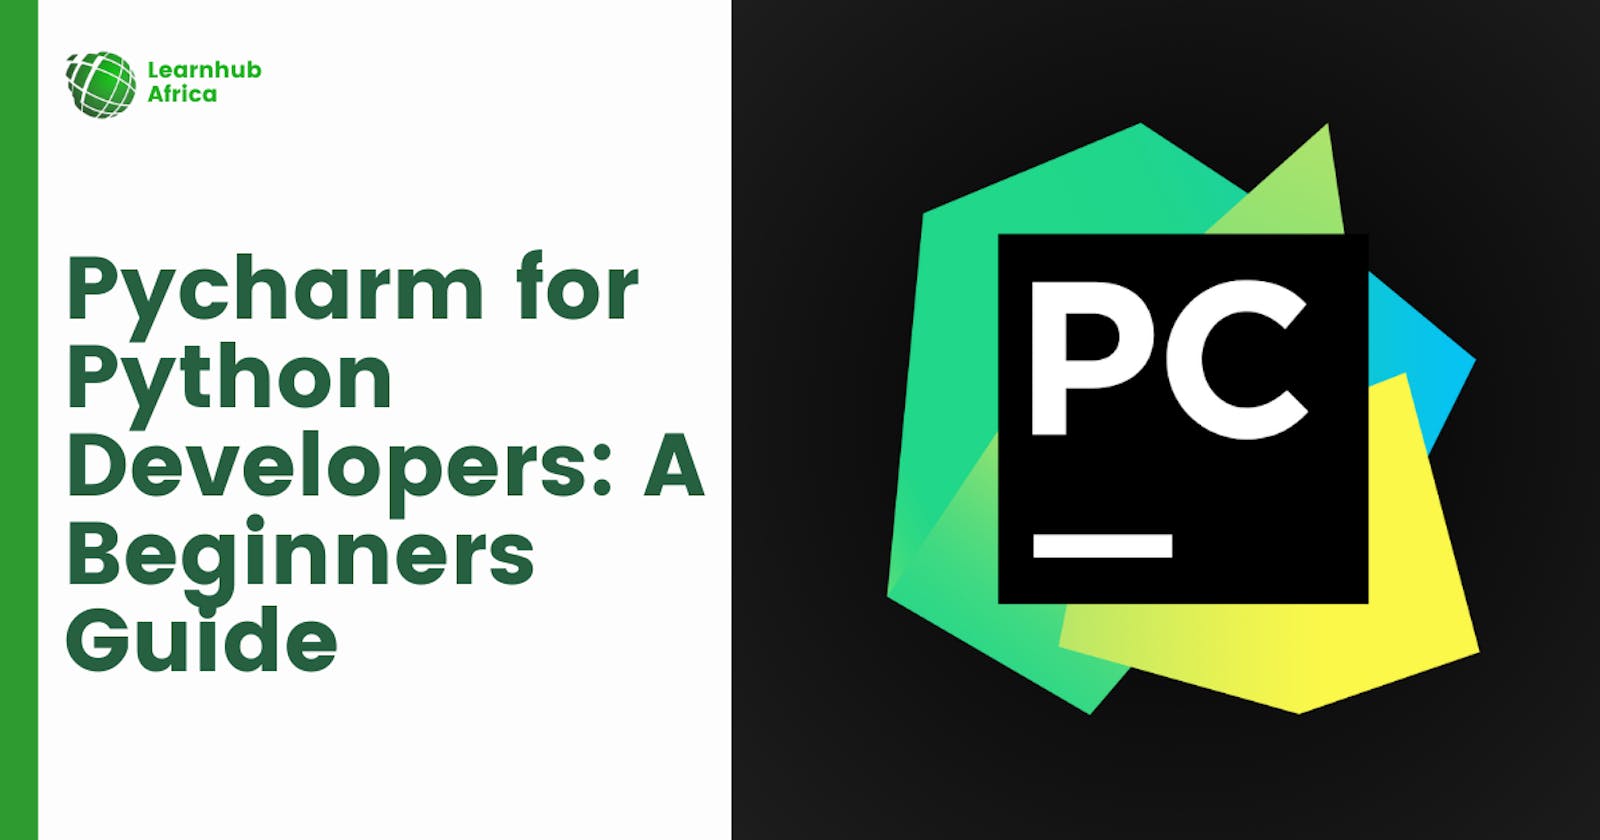 Pycharm for Python Developers: A Beginners Guide